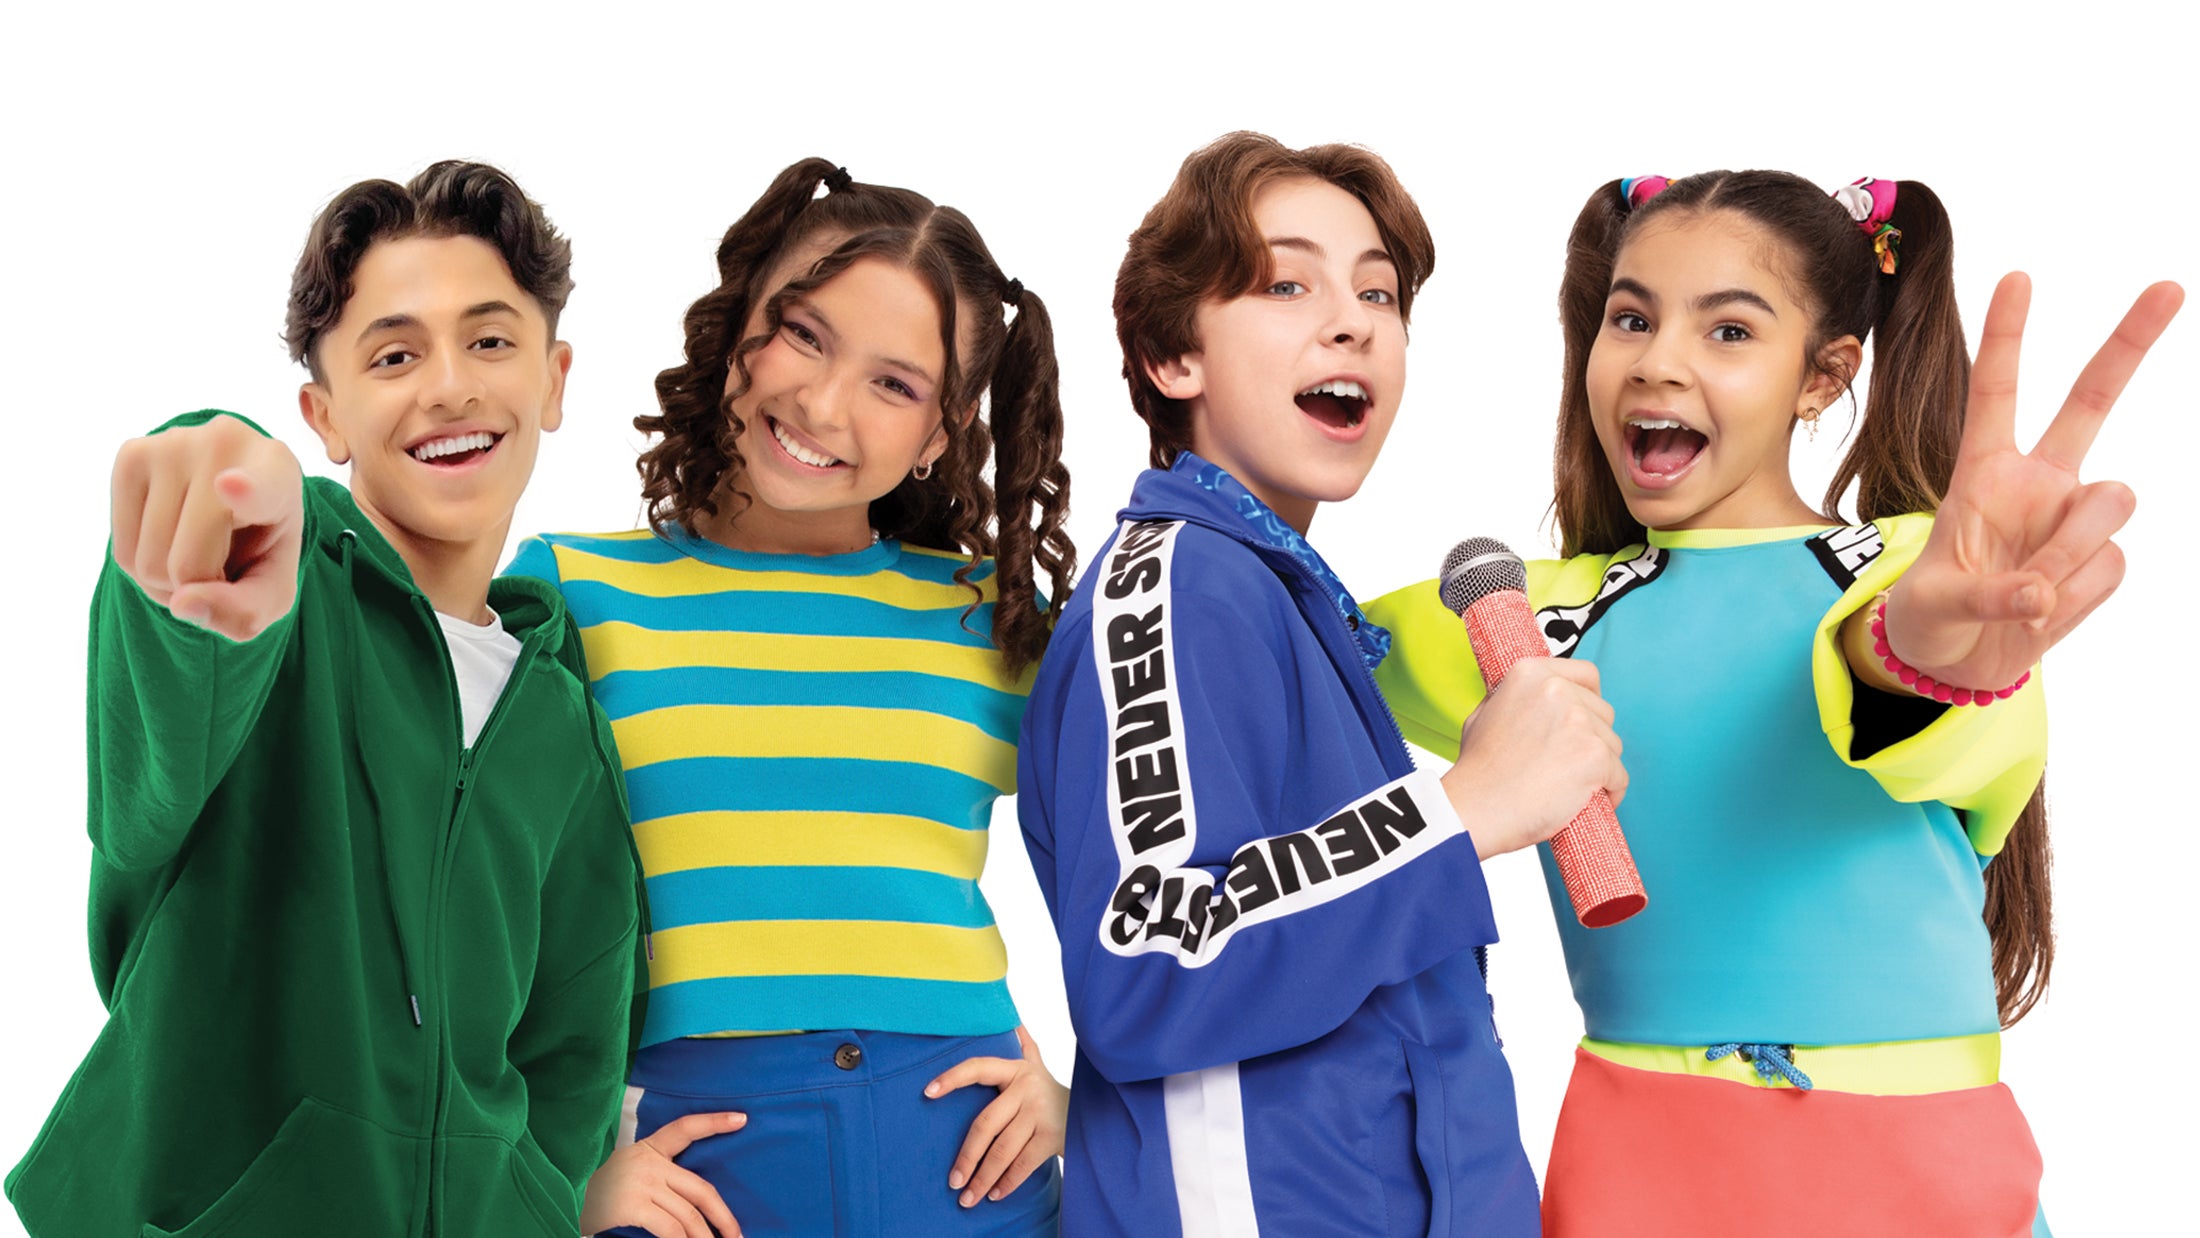 KIDZ BOP Never Stop Live Tour in Inglewood promo photo for VIP Package Onsale presale offer code